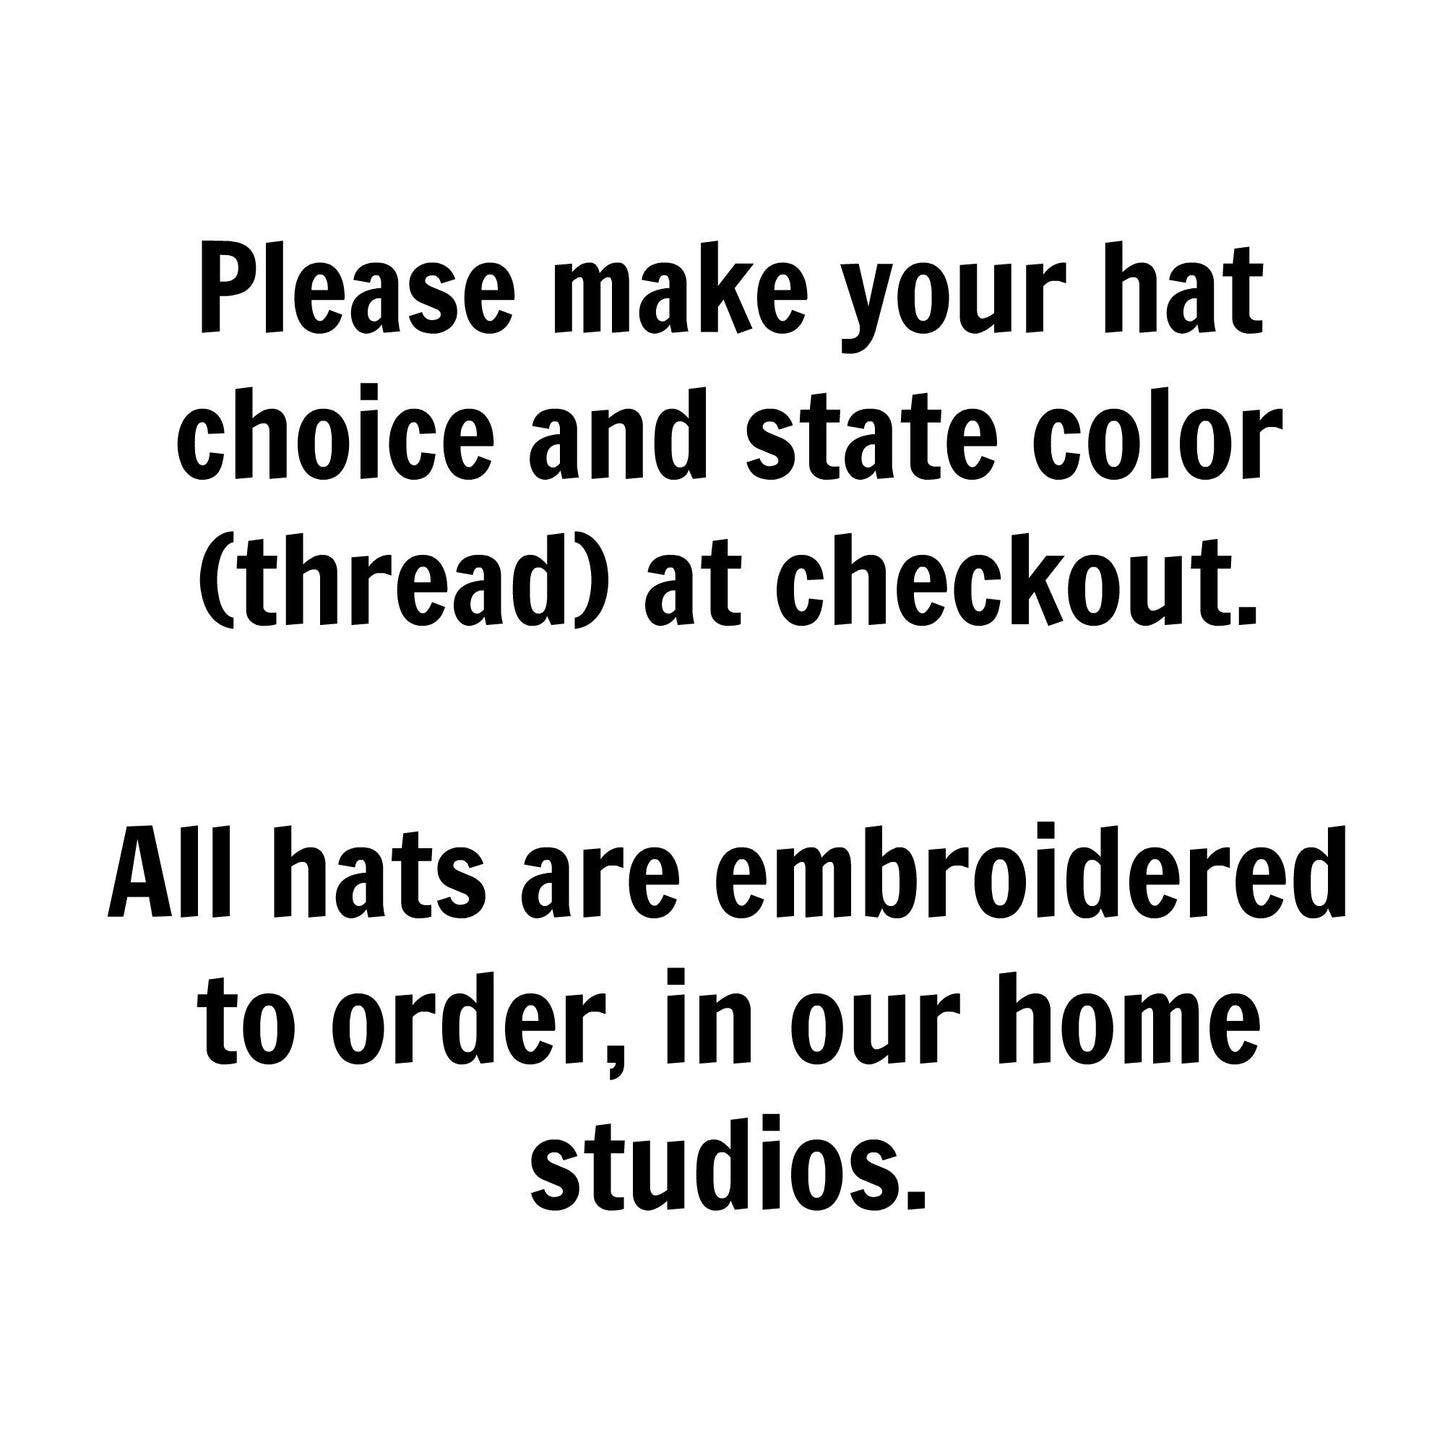 Iowa Hat - Distressed Snapback Trucker Hat - Iowa State Outline - Many Colors Available